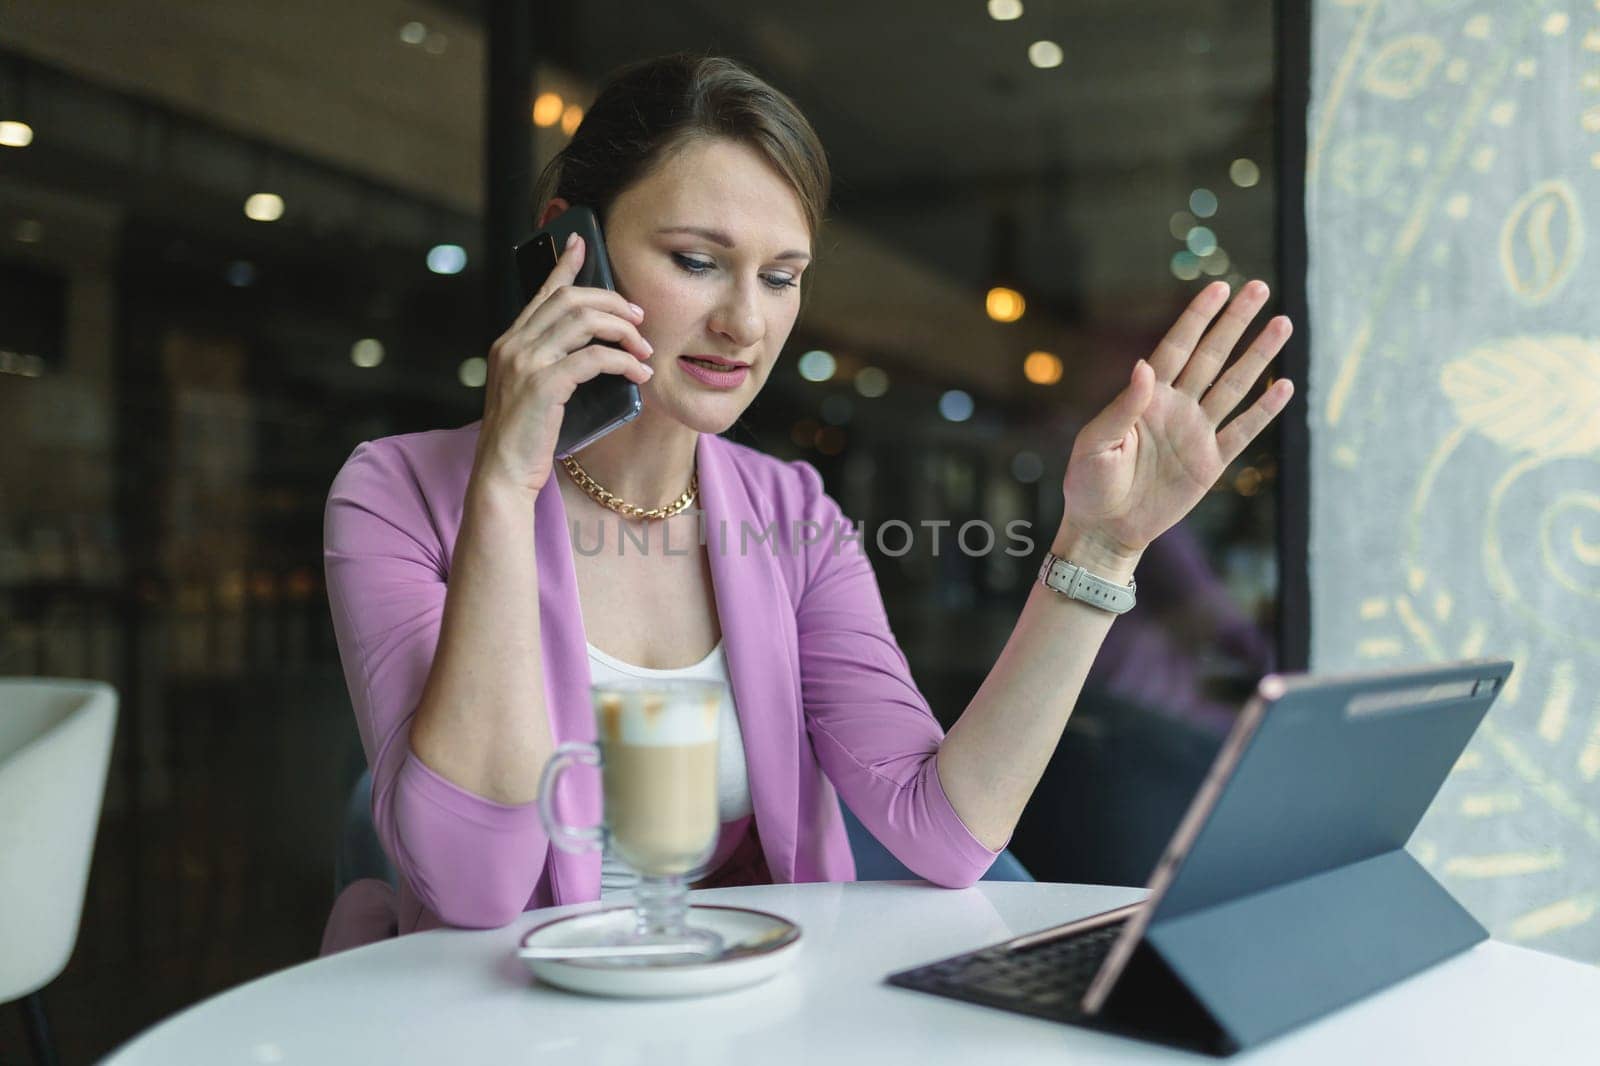 Young business woman solves business issues remotely by phone while sitting in a cafe.